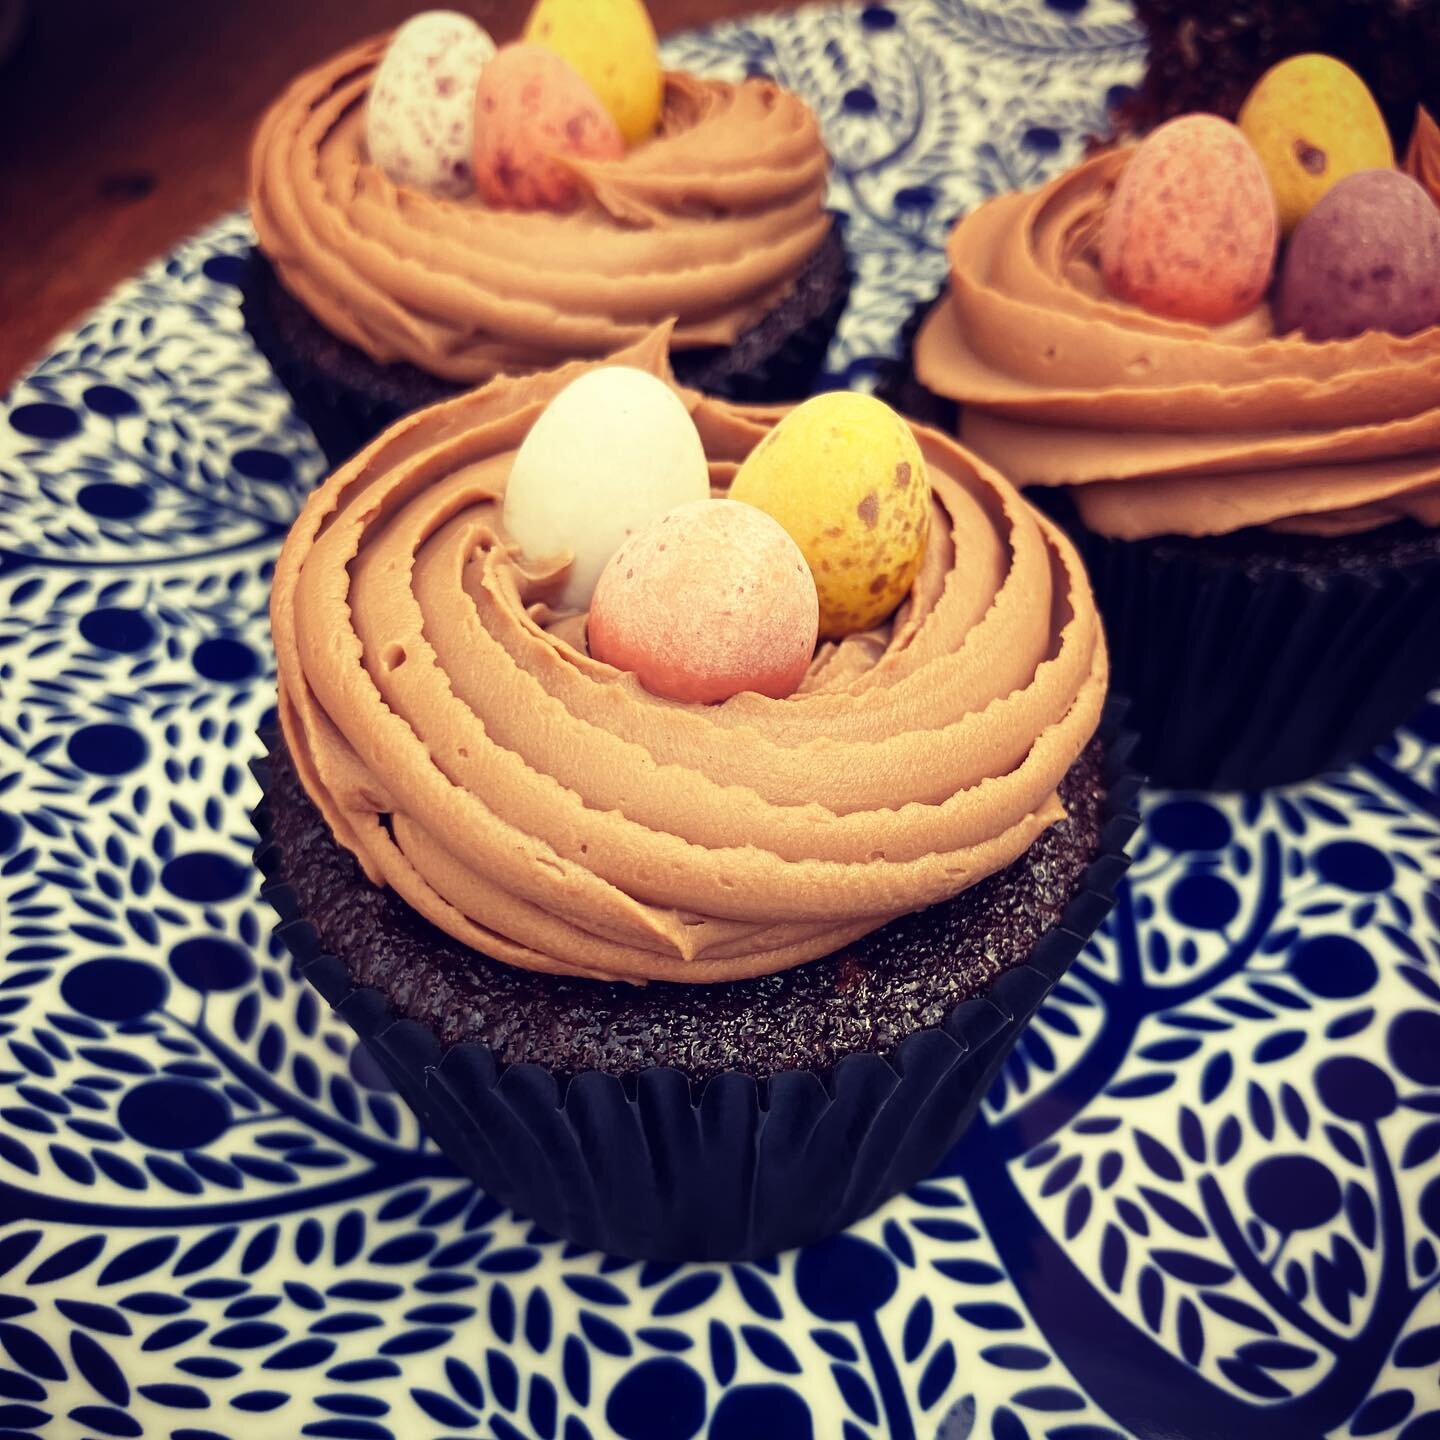 Easter cupcakes available from next week - chocolate Guinness base, whipped milk chocolate ganache, mini eggs.
Carrot cakes get an Easter make over too to brighten up your cake display.
#londonbakes #eastercakes